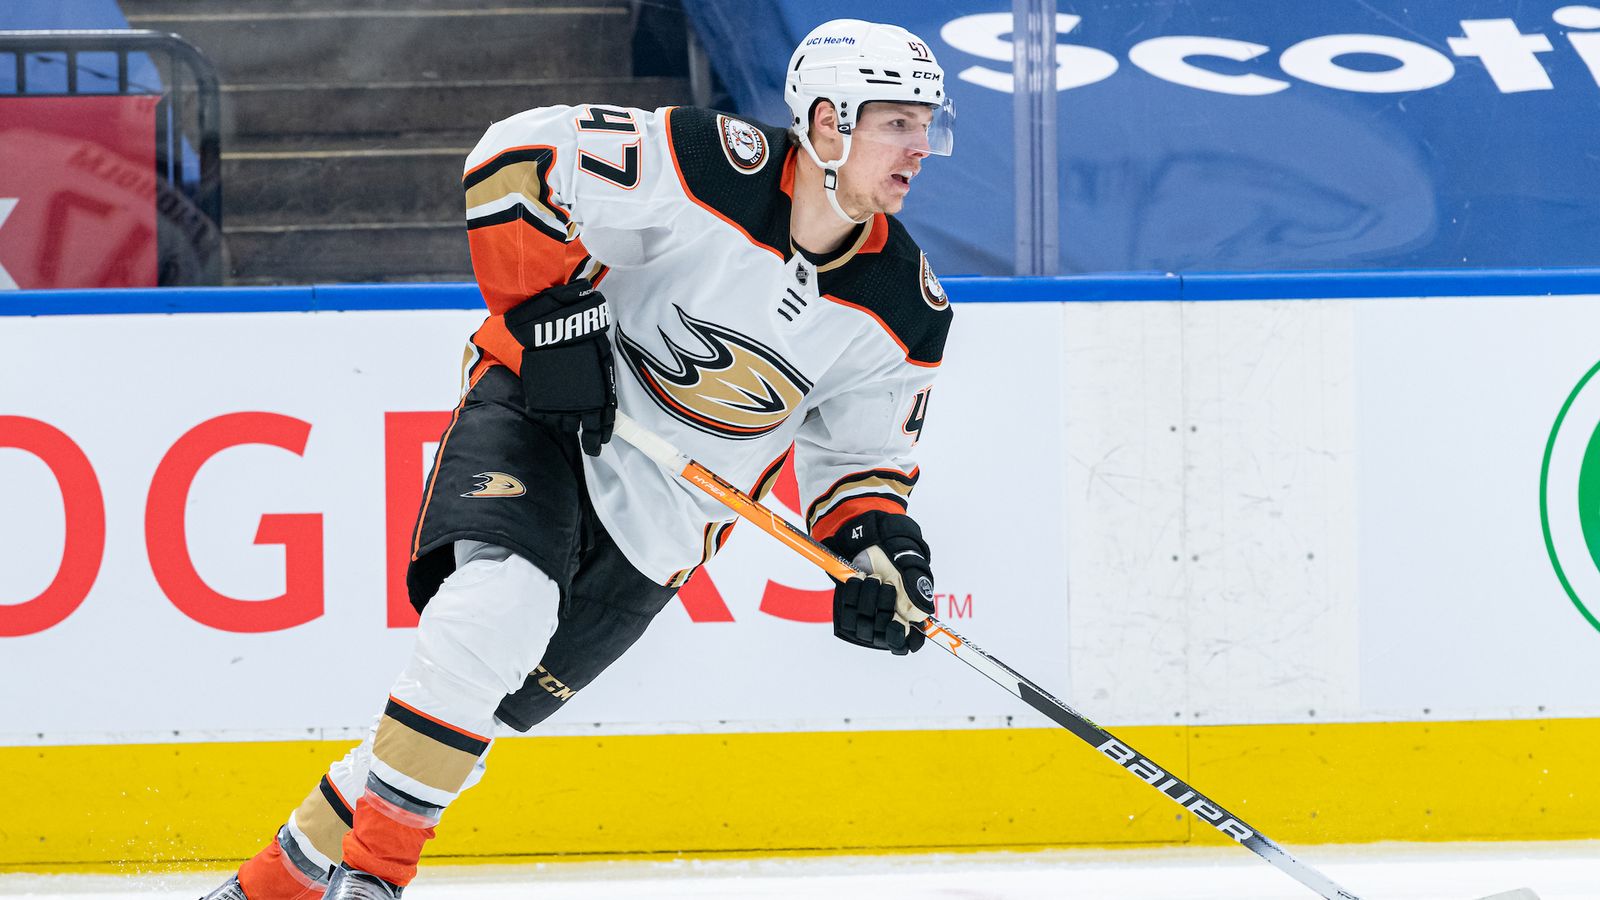 Boston Bruins - The Boston Bruins have acquired defensemen Hampus Lindholm  and Kodie Curran from the Anaheim Ducks